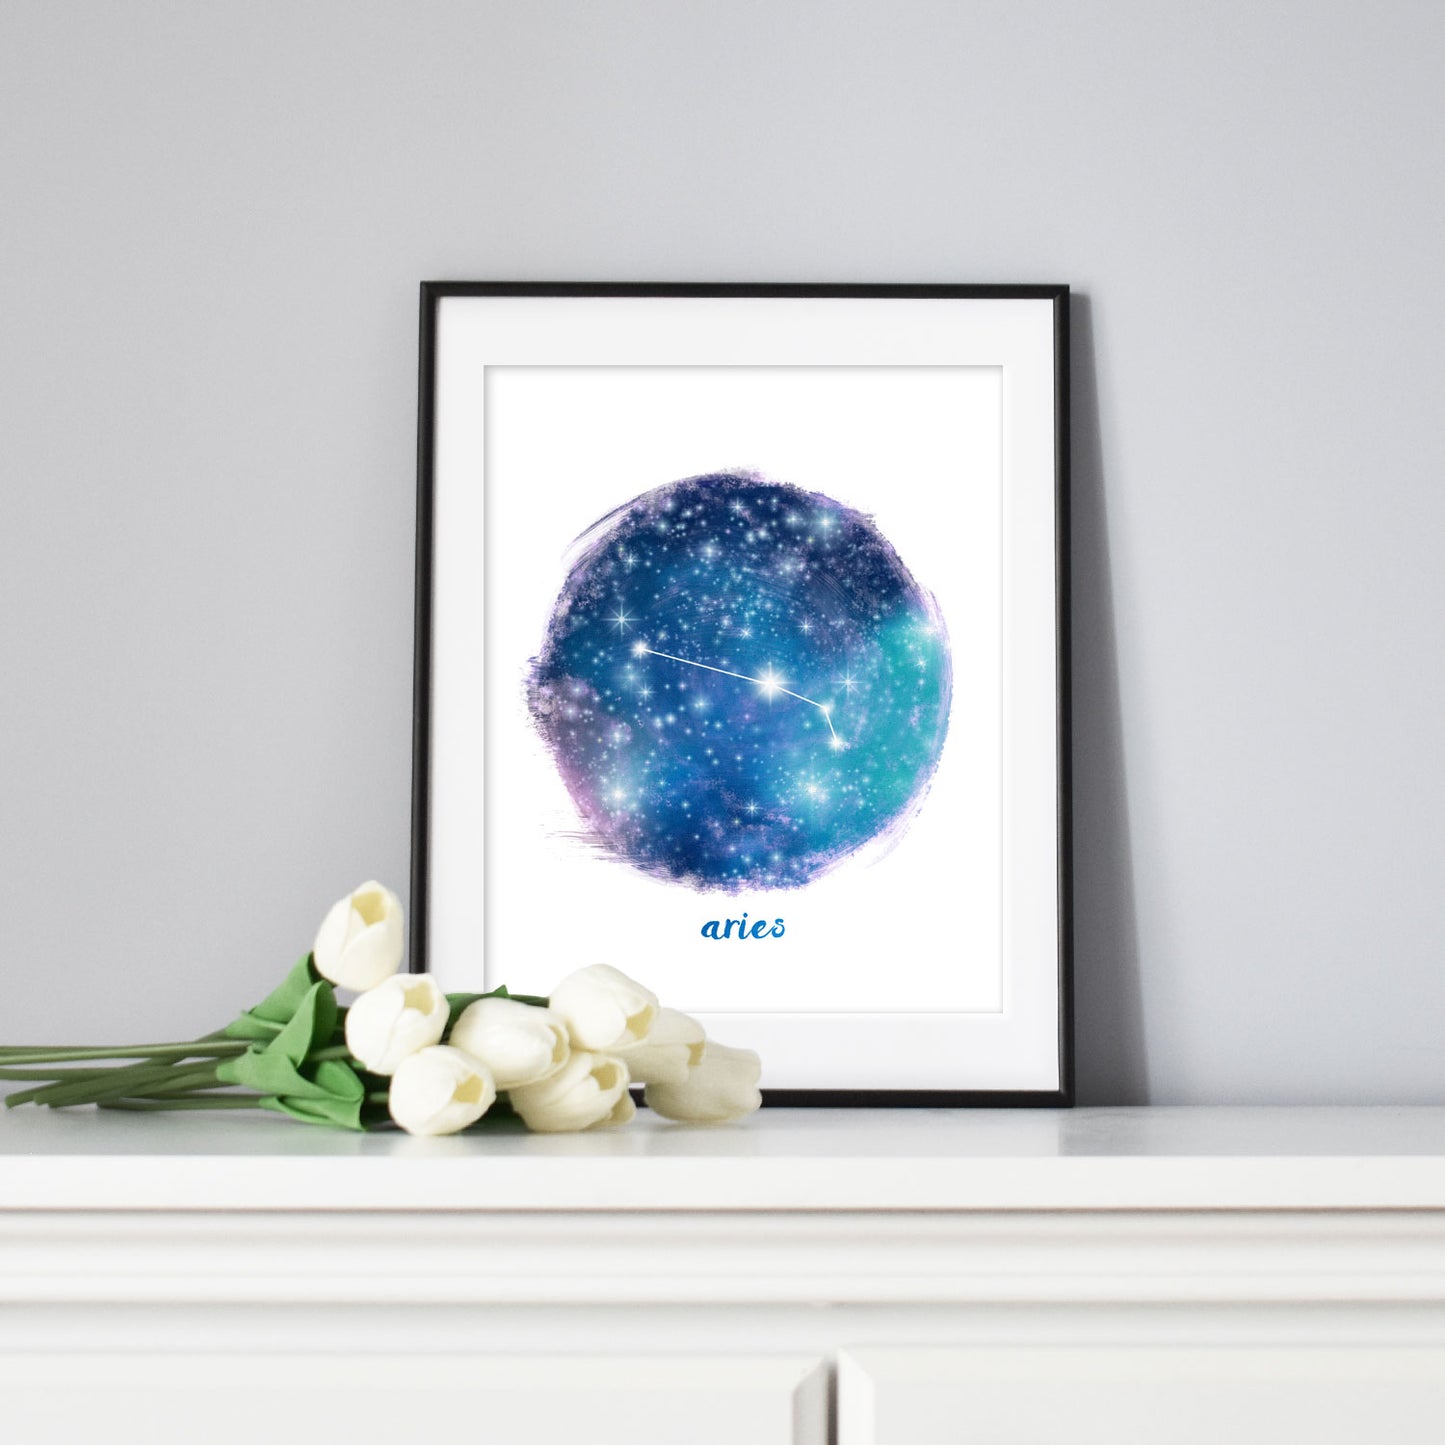 Printable Aries Star Sign by Playful Pixie Studio